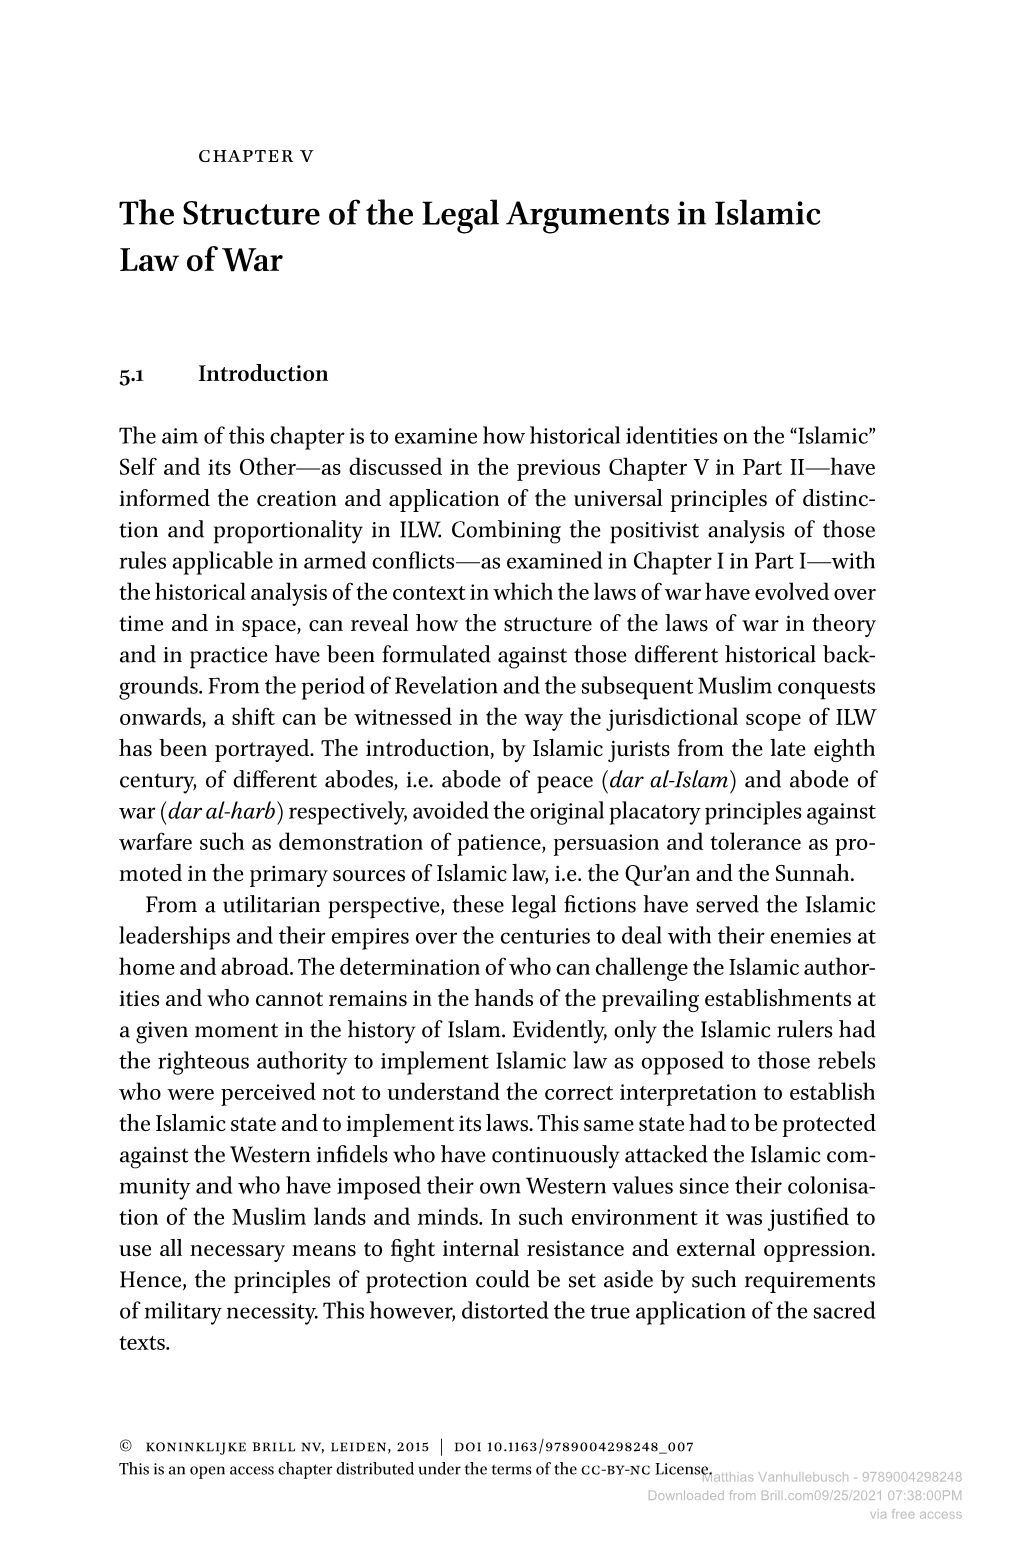 The Structure of the Legal Arguments in Islamic Law of War